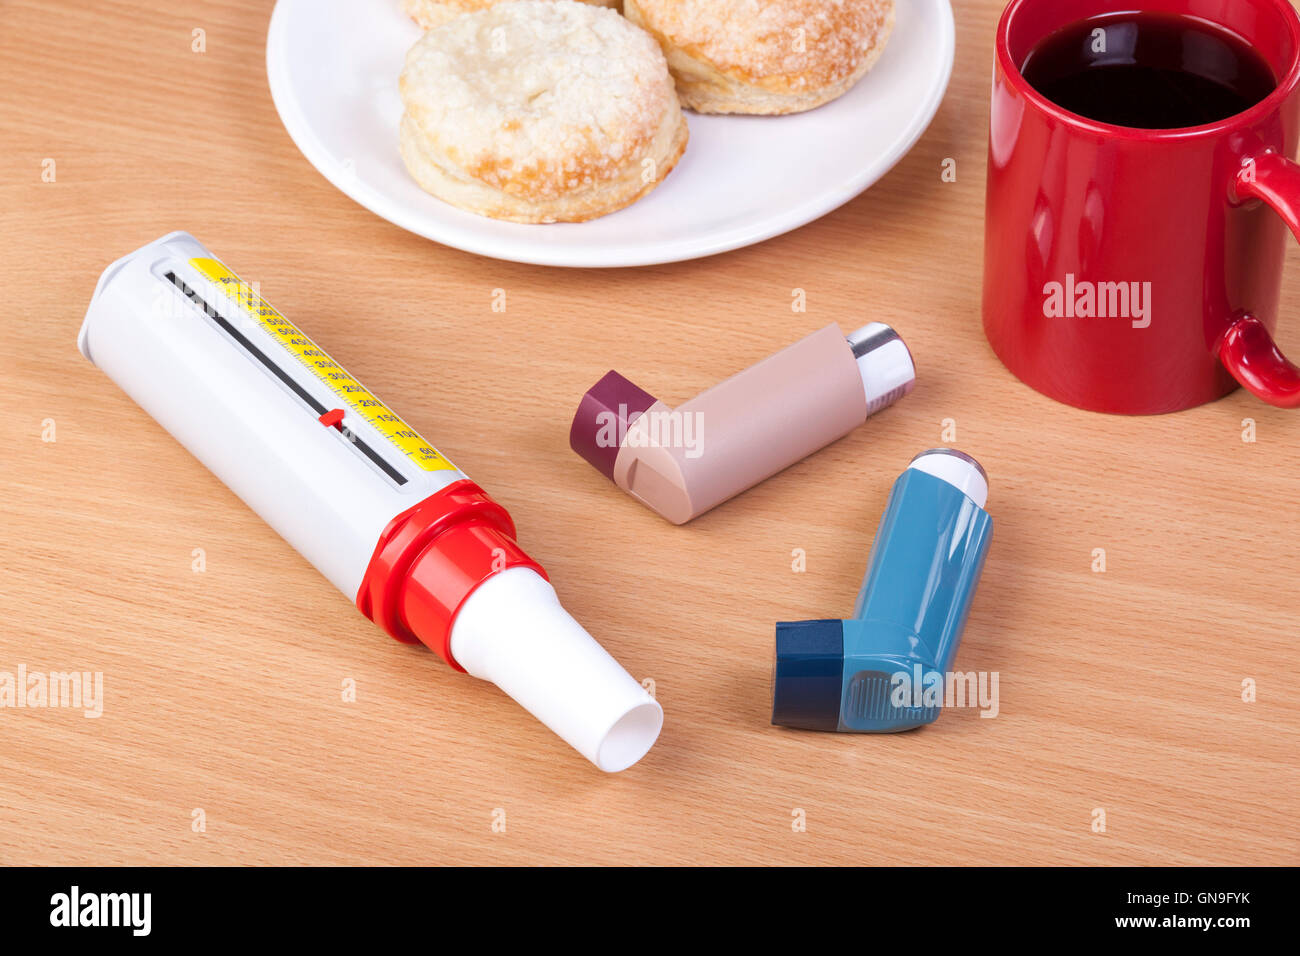 Blue and brown asthma spray inhalers laying on a breakfast table with a  peek flow meter next to a mug of black coffee and a plat Stock Photo - Alamy